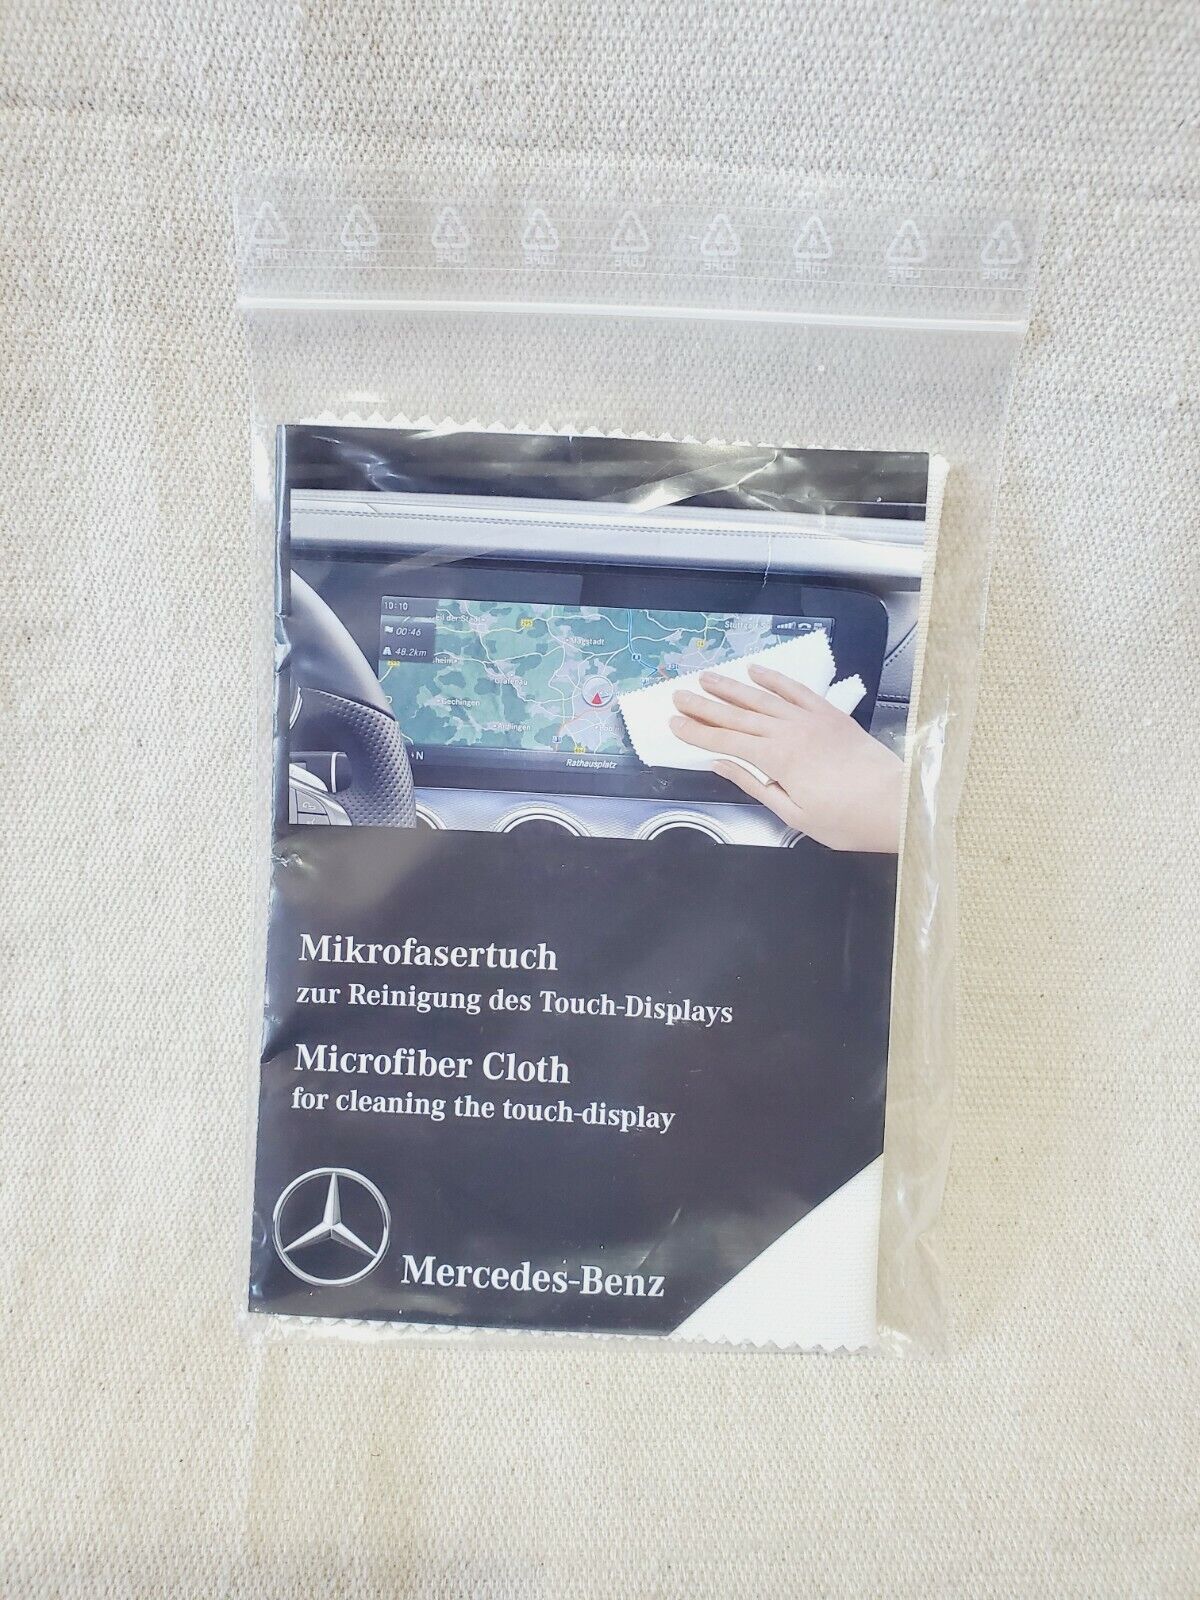 OEM NEW MERCEDES BENZ MICROFIBER CLOTH for cleaning the touchdisplay A0009865500